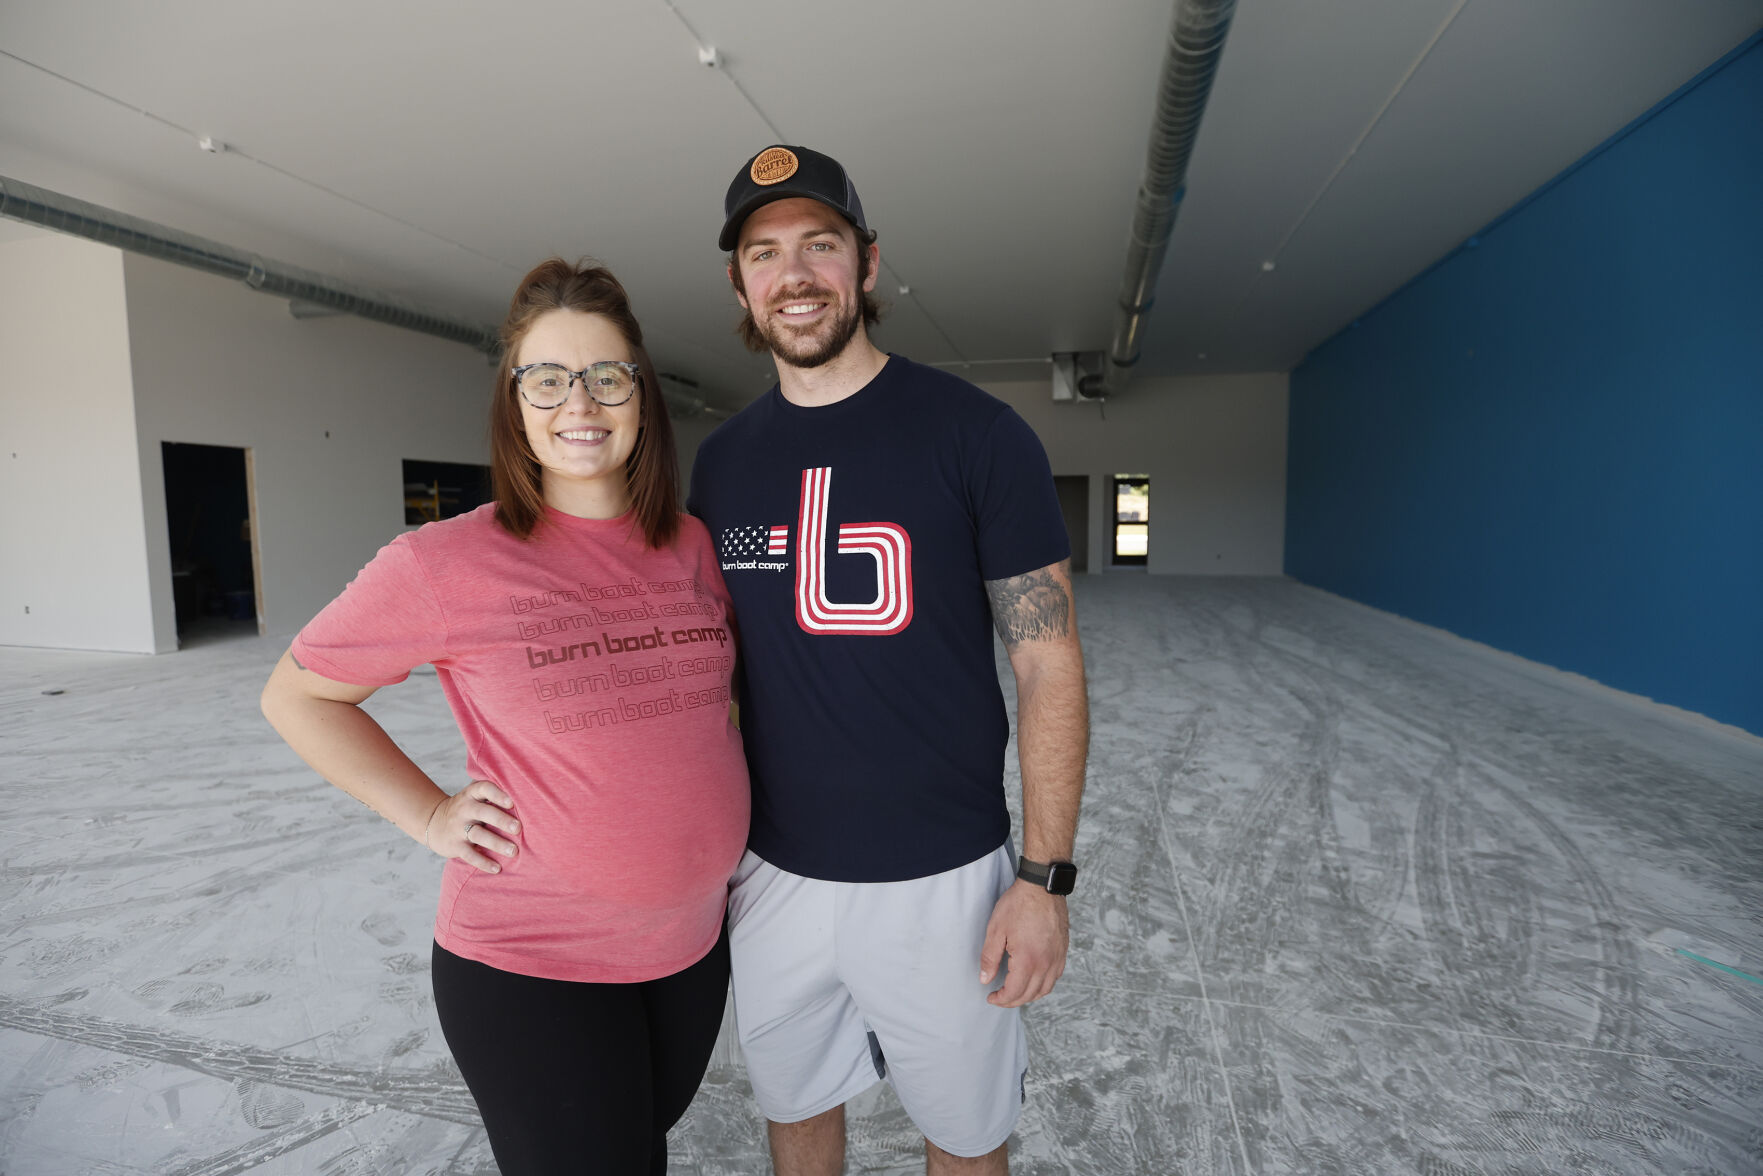 Owners Tiffany Raisbeck (left) and Kyle Hoppman will open Burn Boot Camp on Stoneman Road in Dubuque.    PHOTO CREDIT: JESSICA REILLY